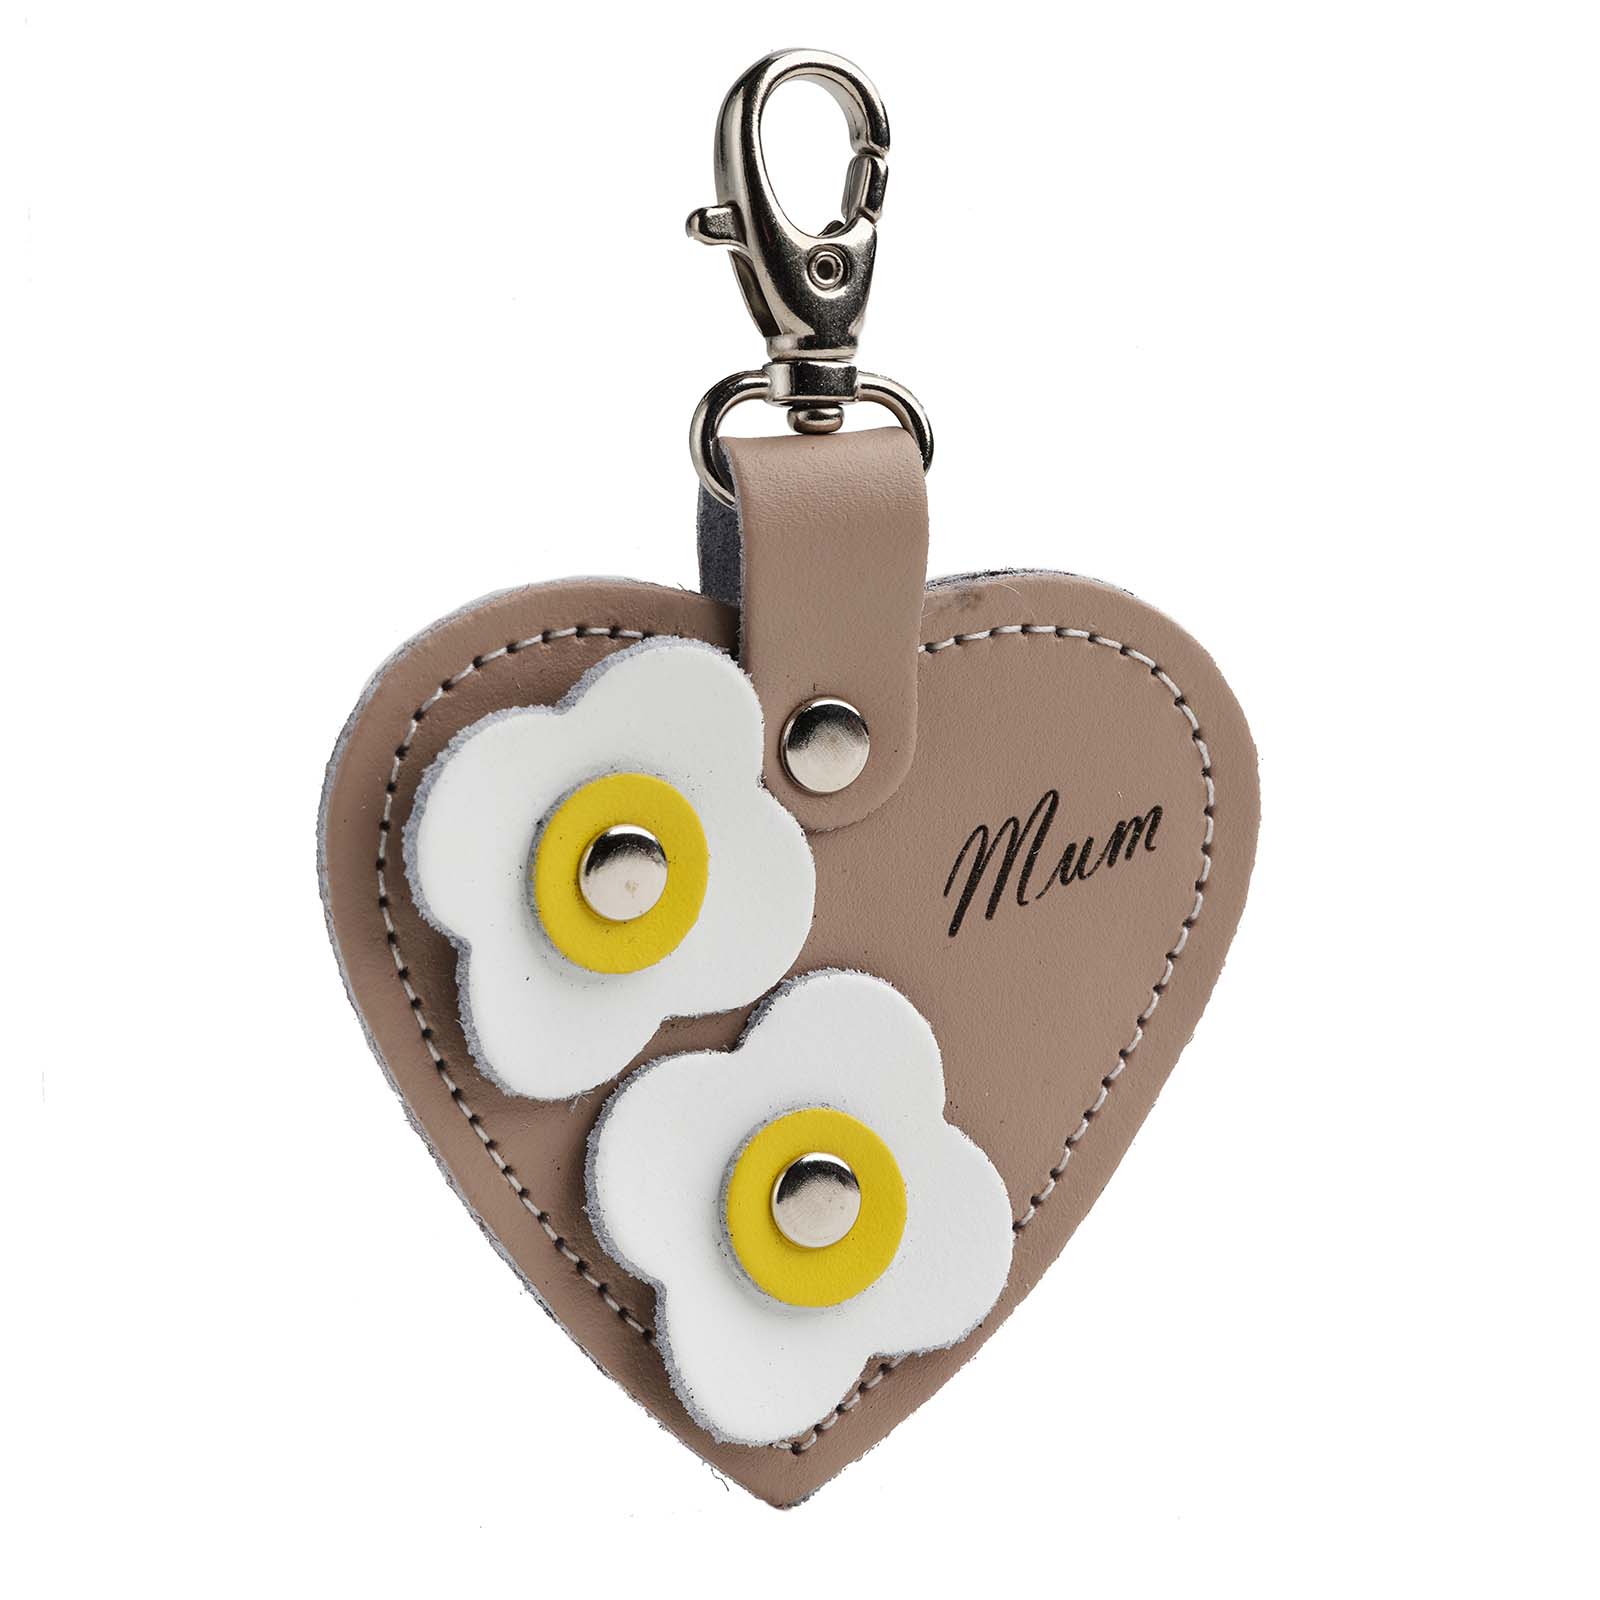 Love heart bag charm - with ’Mum’ engraving and flower appliques - Iced Coffee